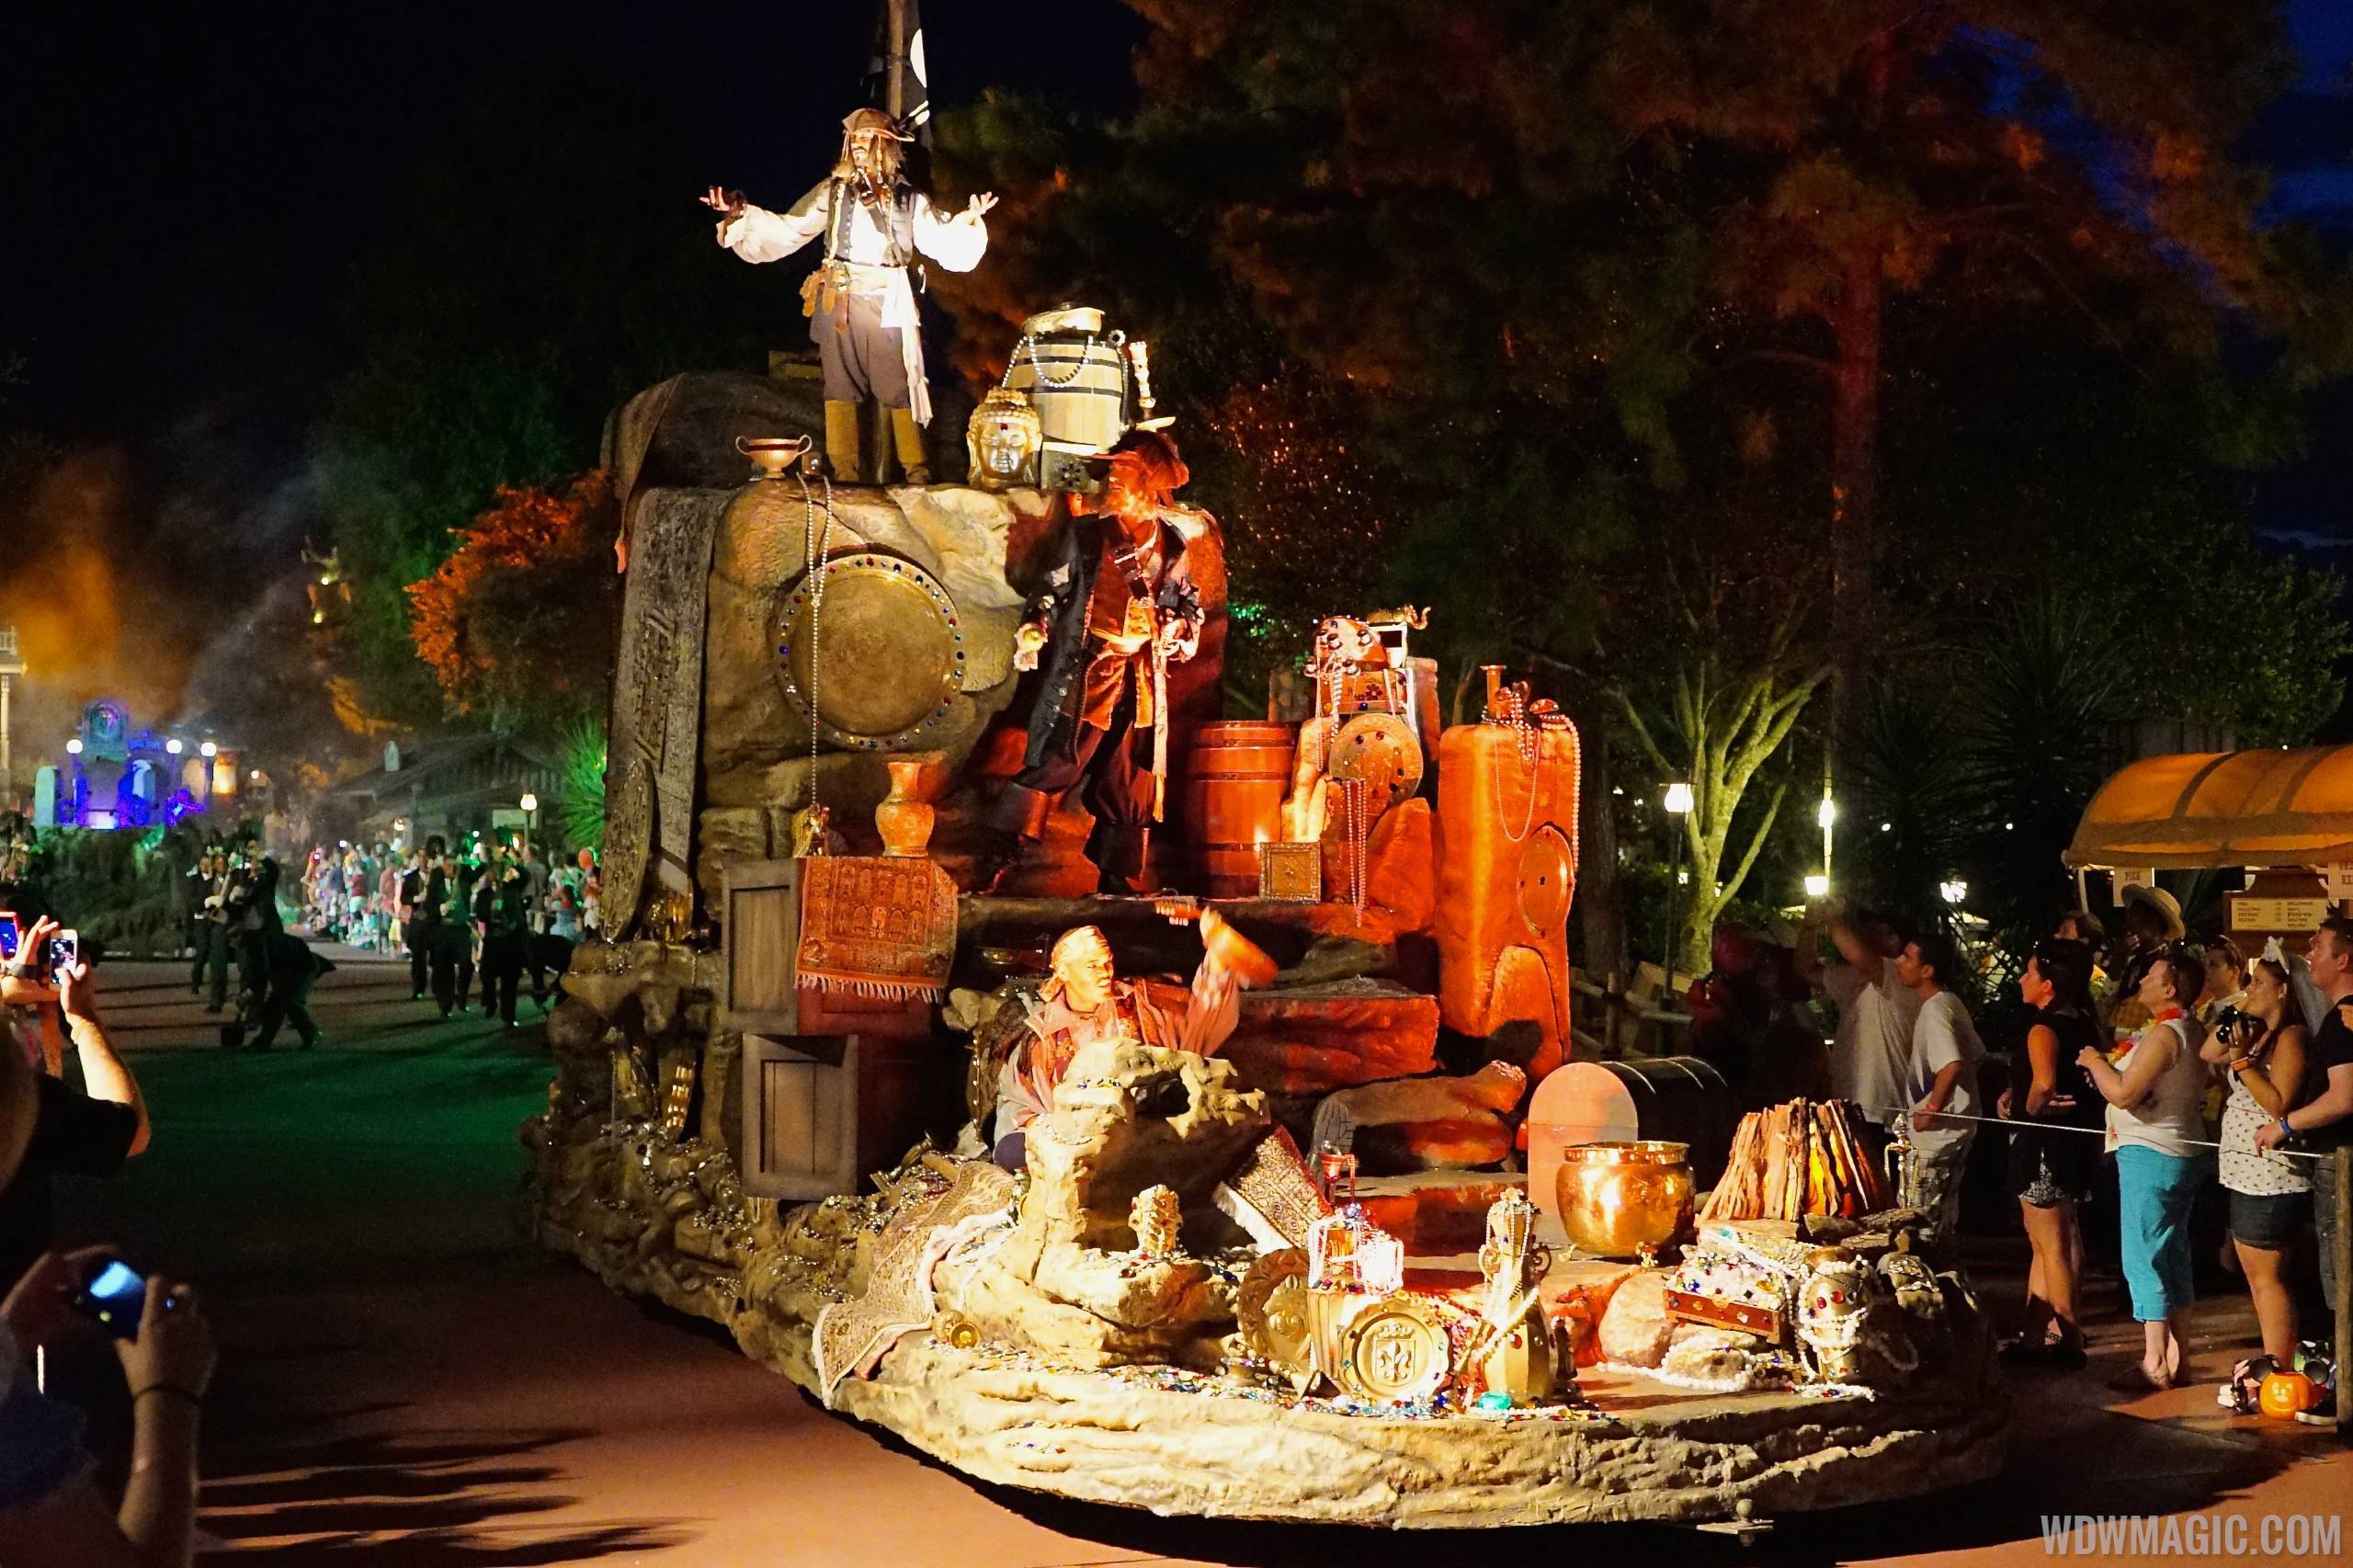 Boo To You Parade - Pirates of the Caribbean unit